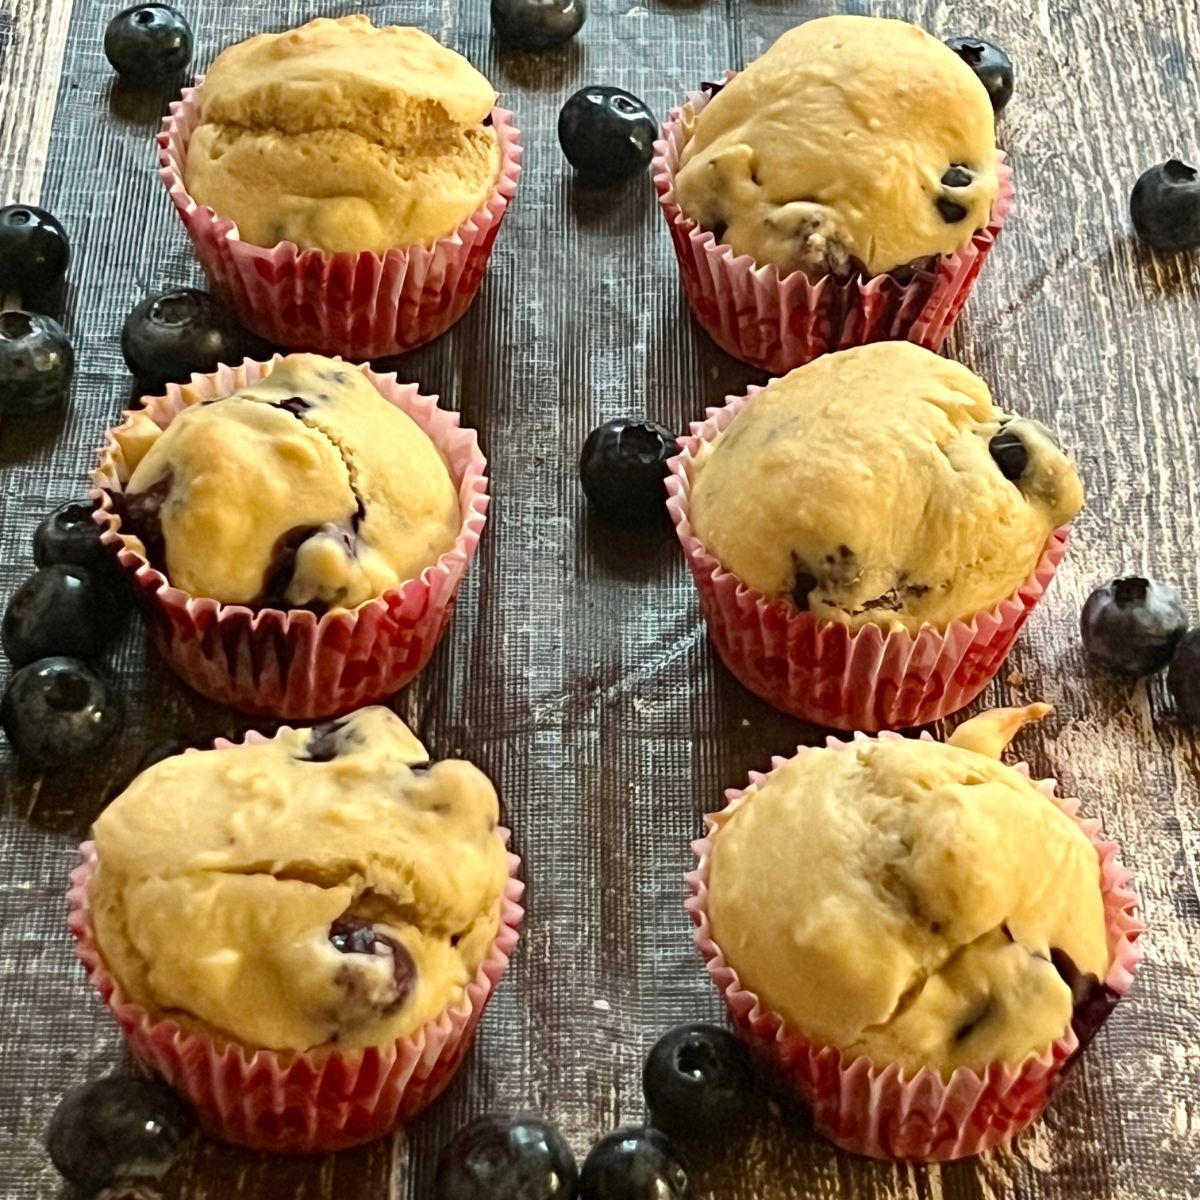 6 WW Banana Blueberry Muffins on a table with Blueberries